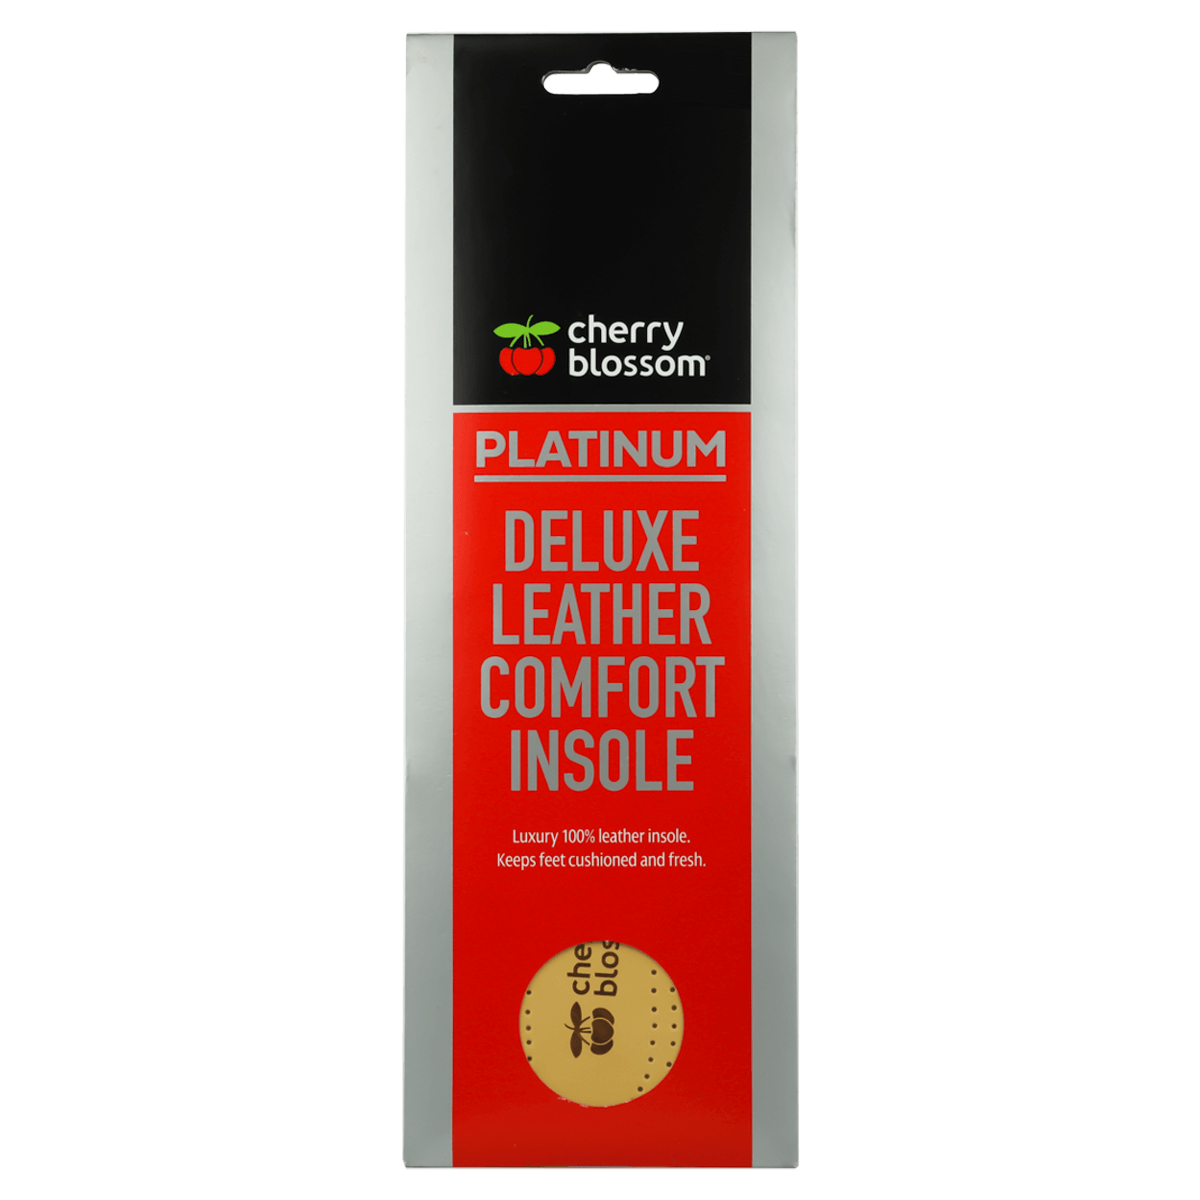 Deluxe Leather Comfort Insole